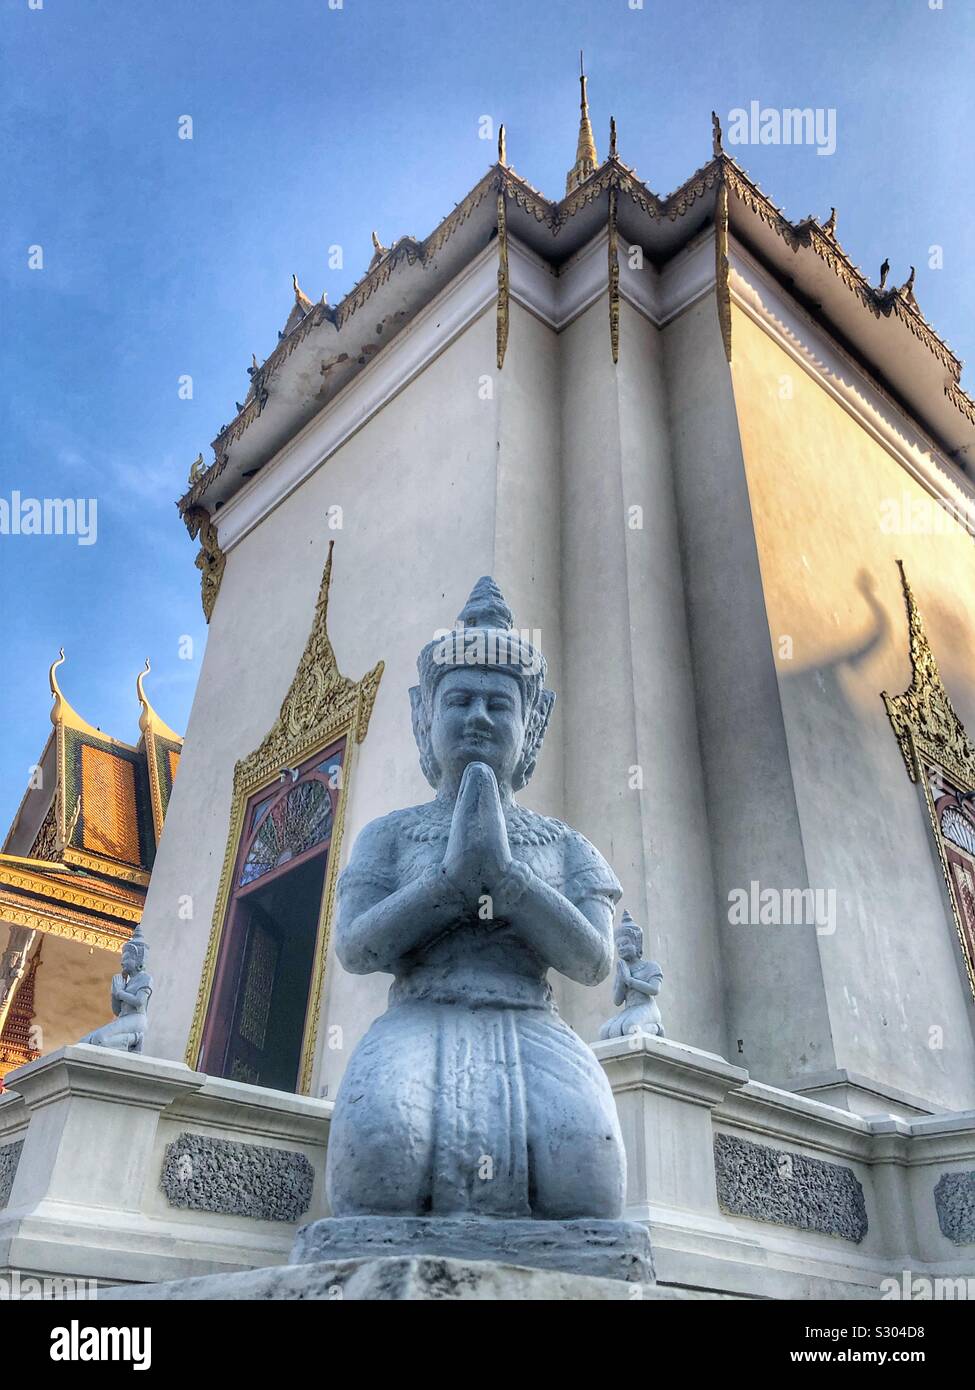 A temple at the Royal Palace in Phnom Penh, Cambodia. Stock Photo